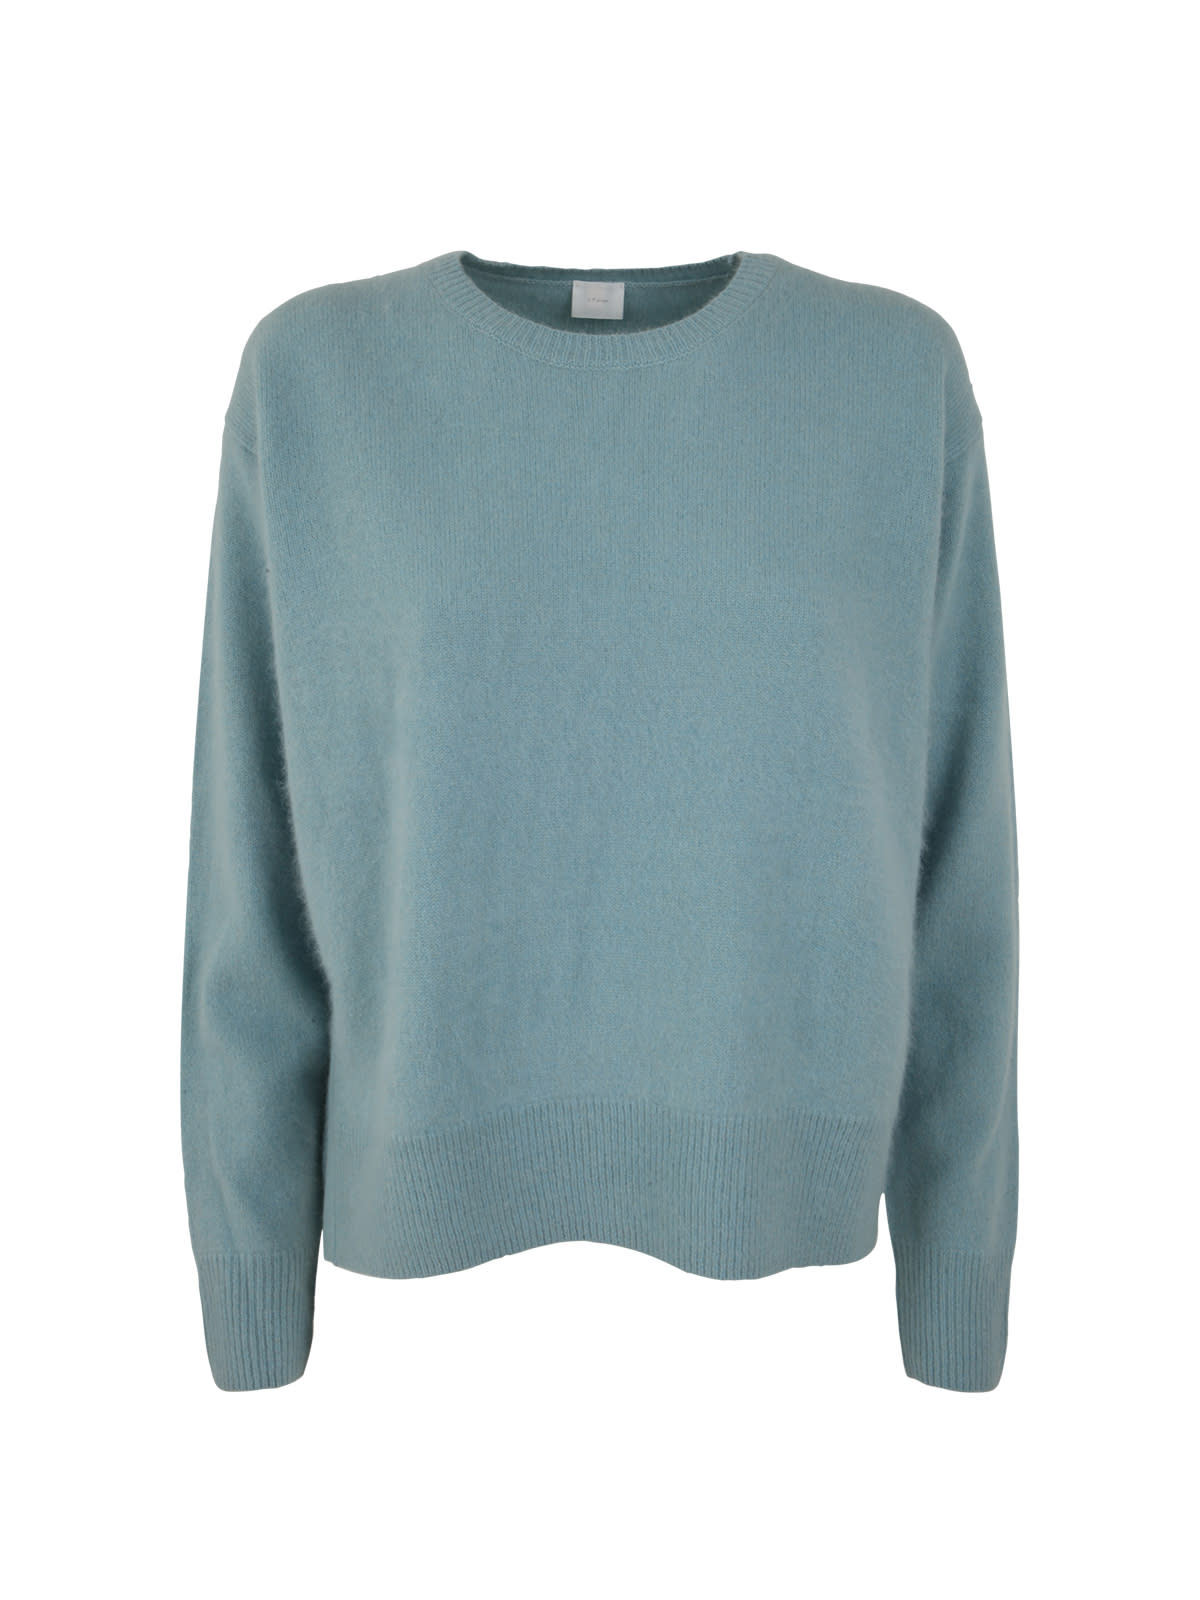 C.T.plage Crew Neck Sweater With Side Slits